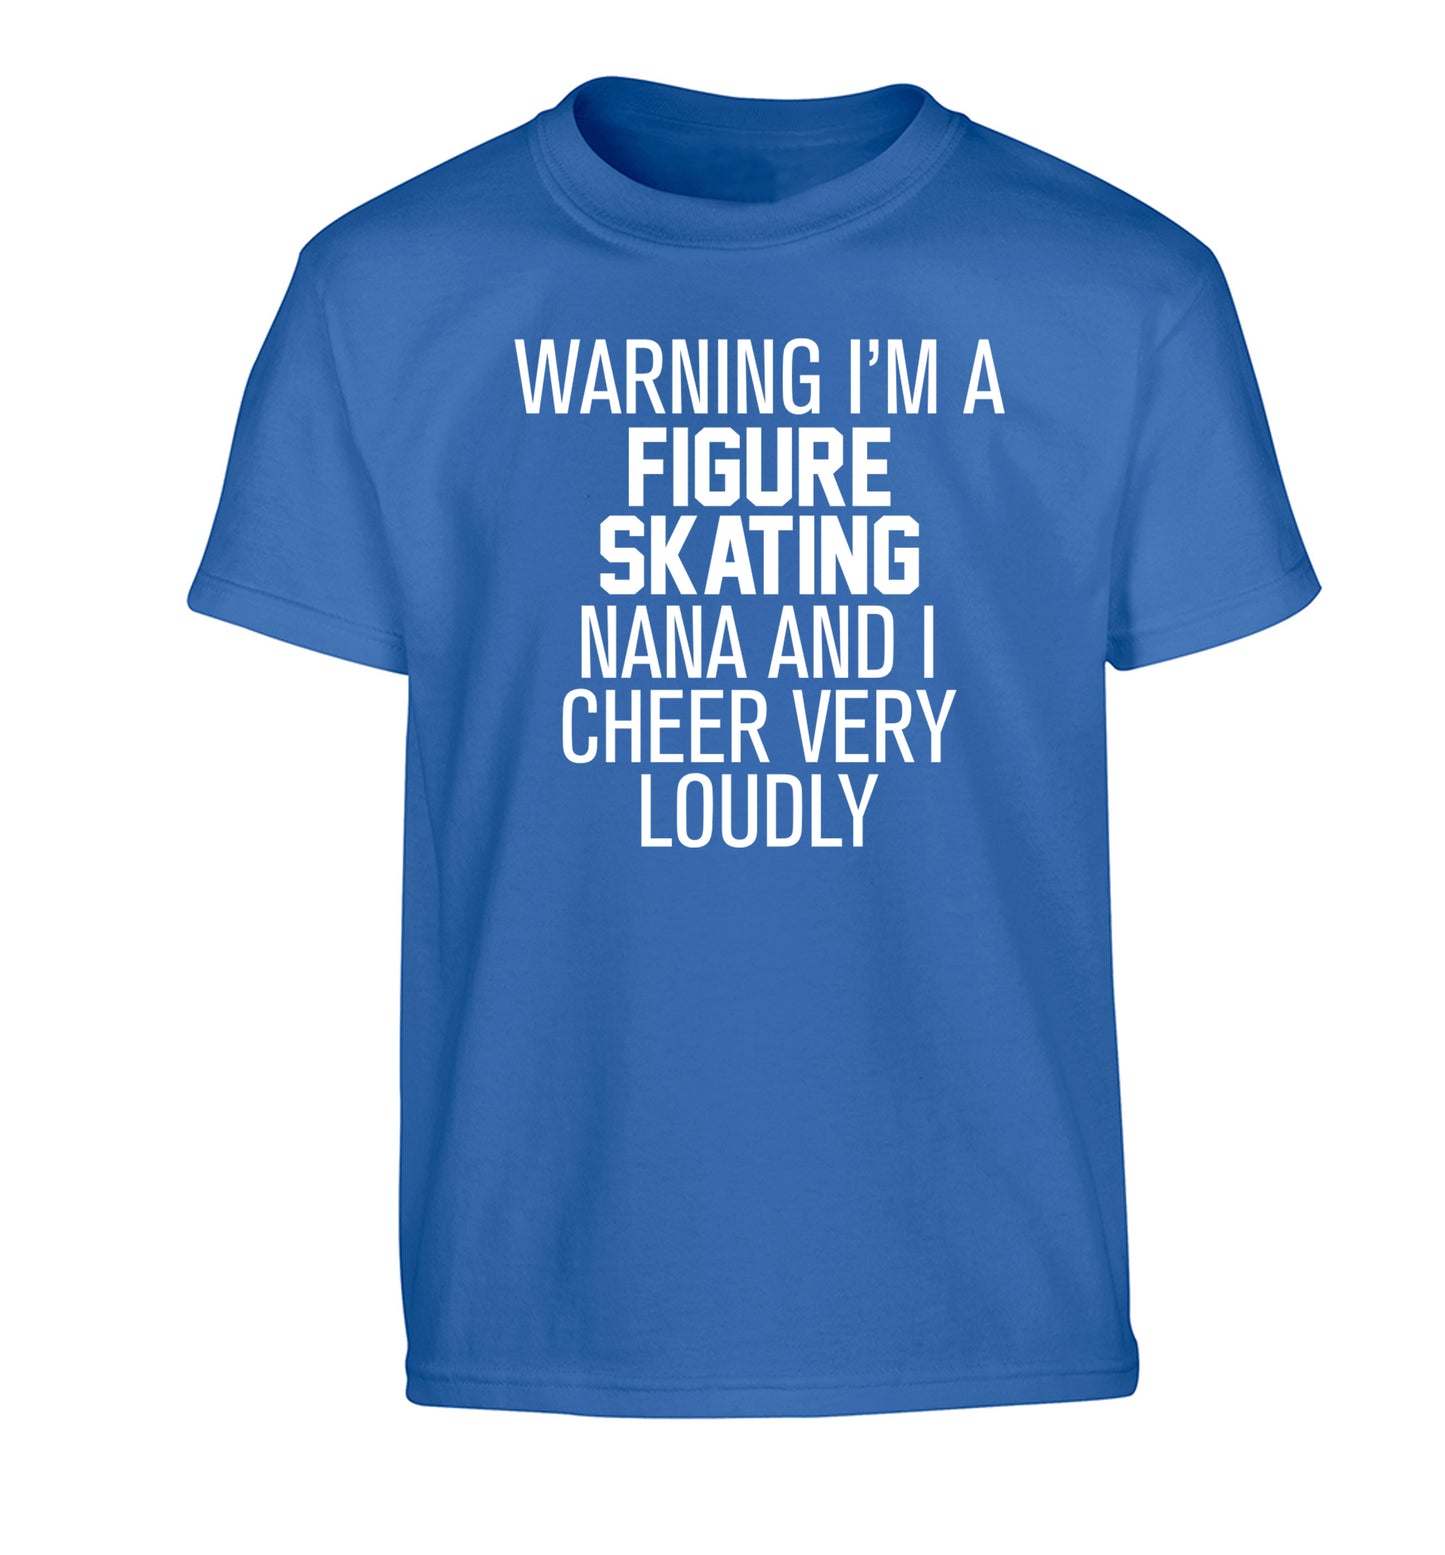 Warning I'm a figure skating nana and I cheer very loudly Children's blue Tshirt 12-14 Years